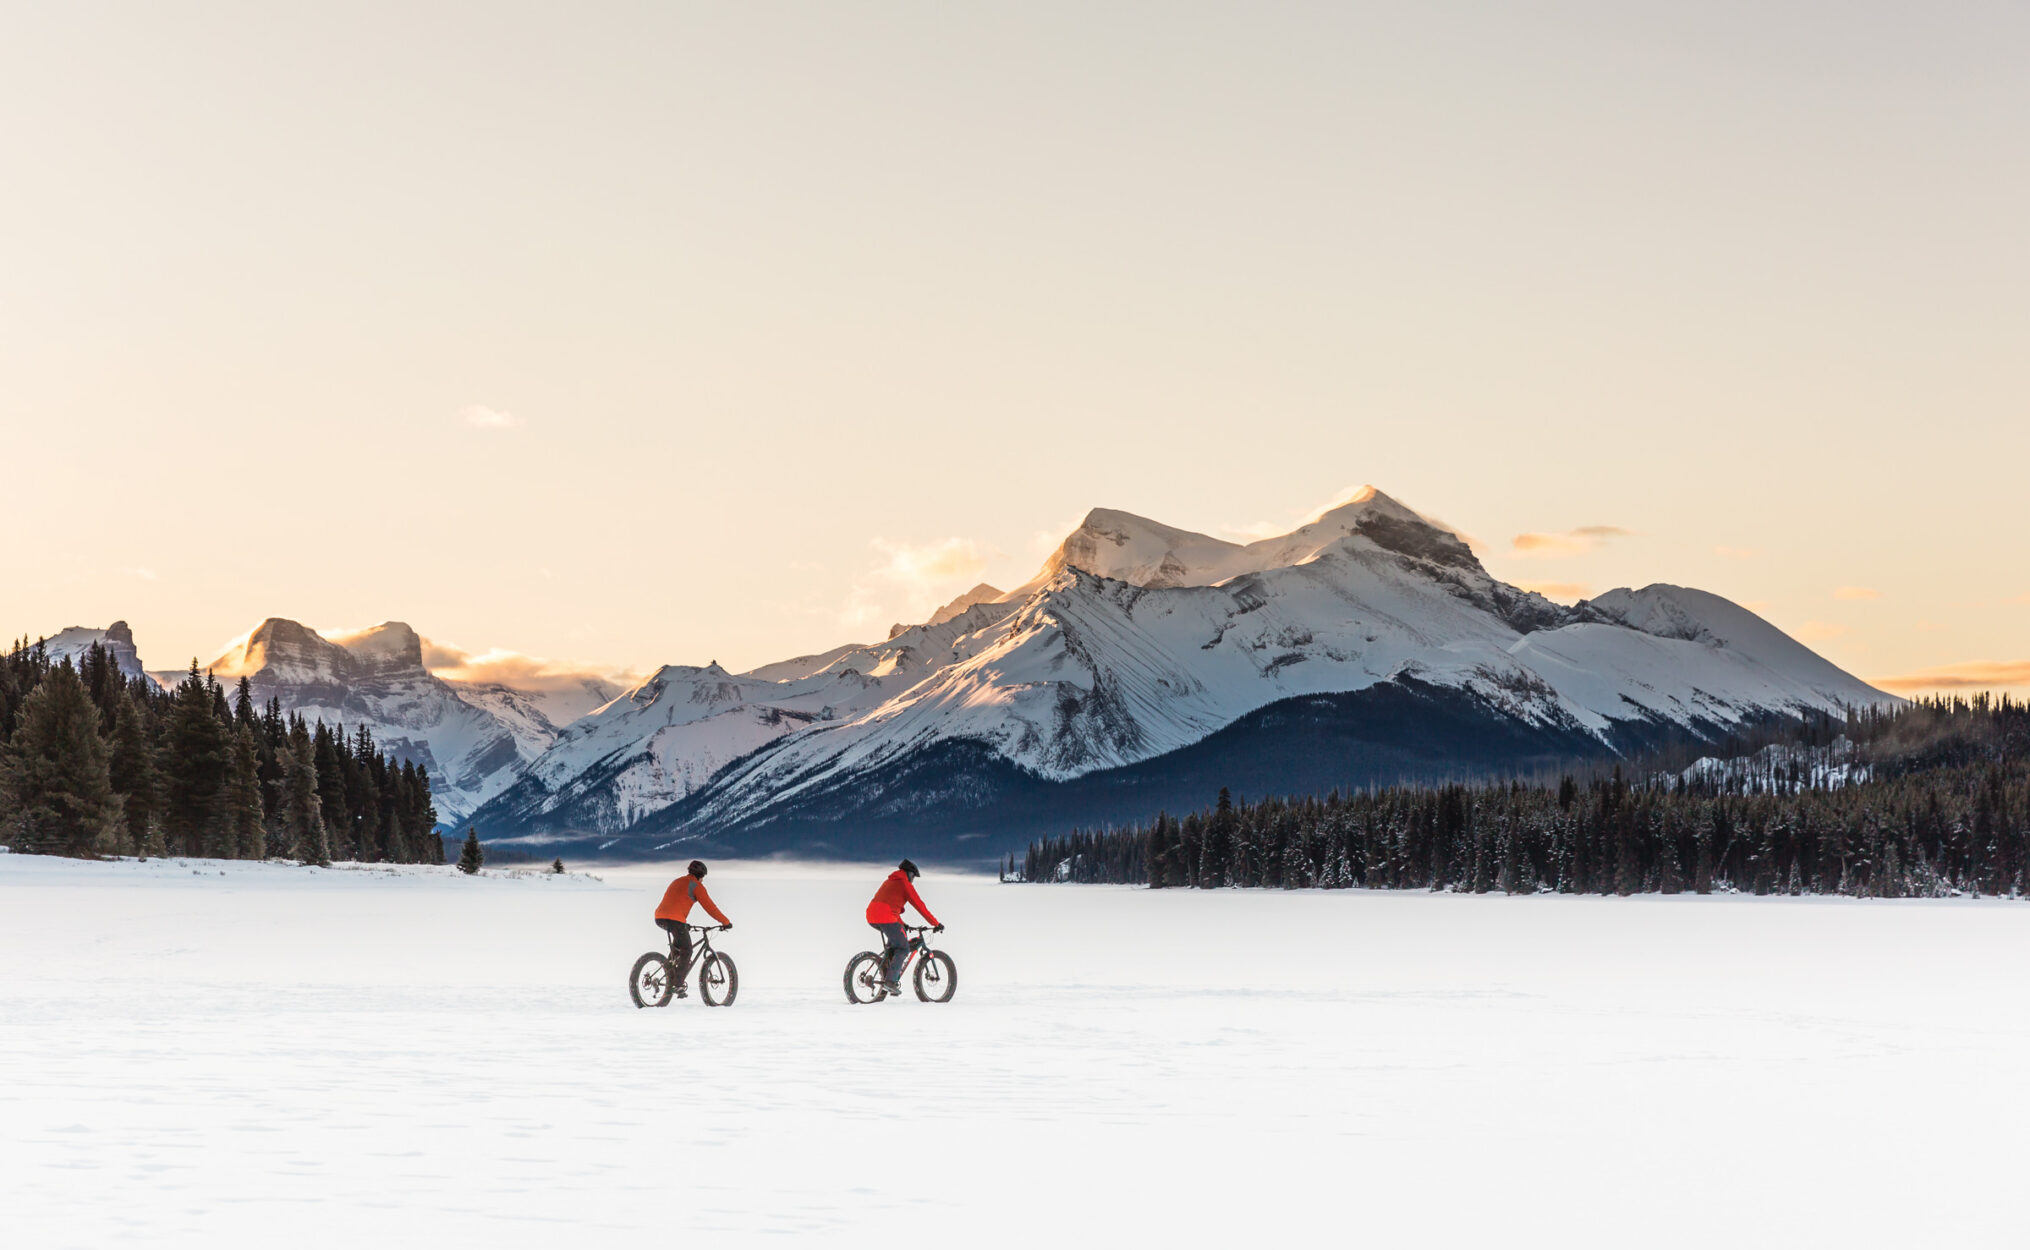 Get Fat: A Very Brief History of Fat Biking in the Canadian Rockies on Where Rockies